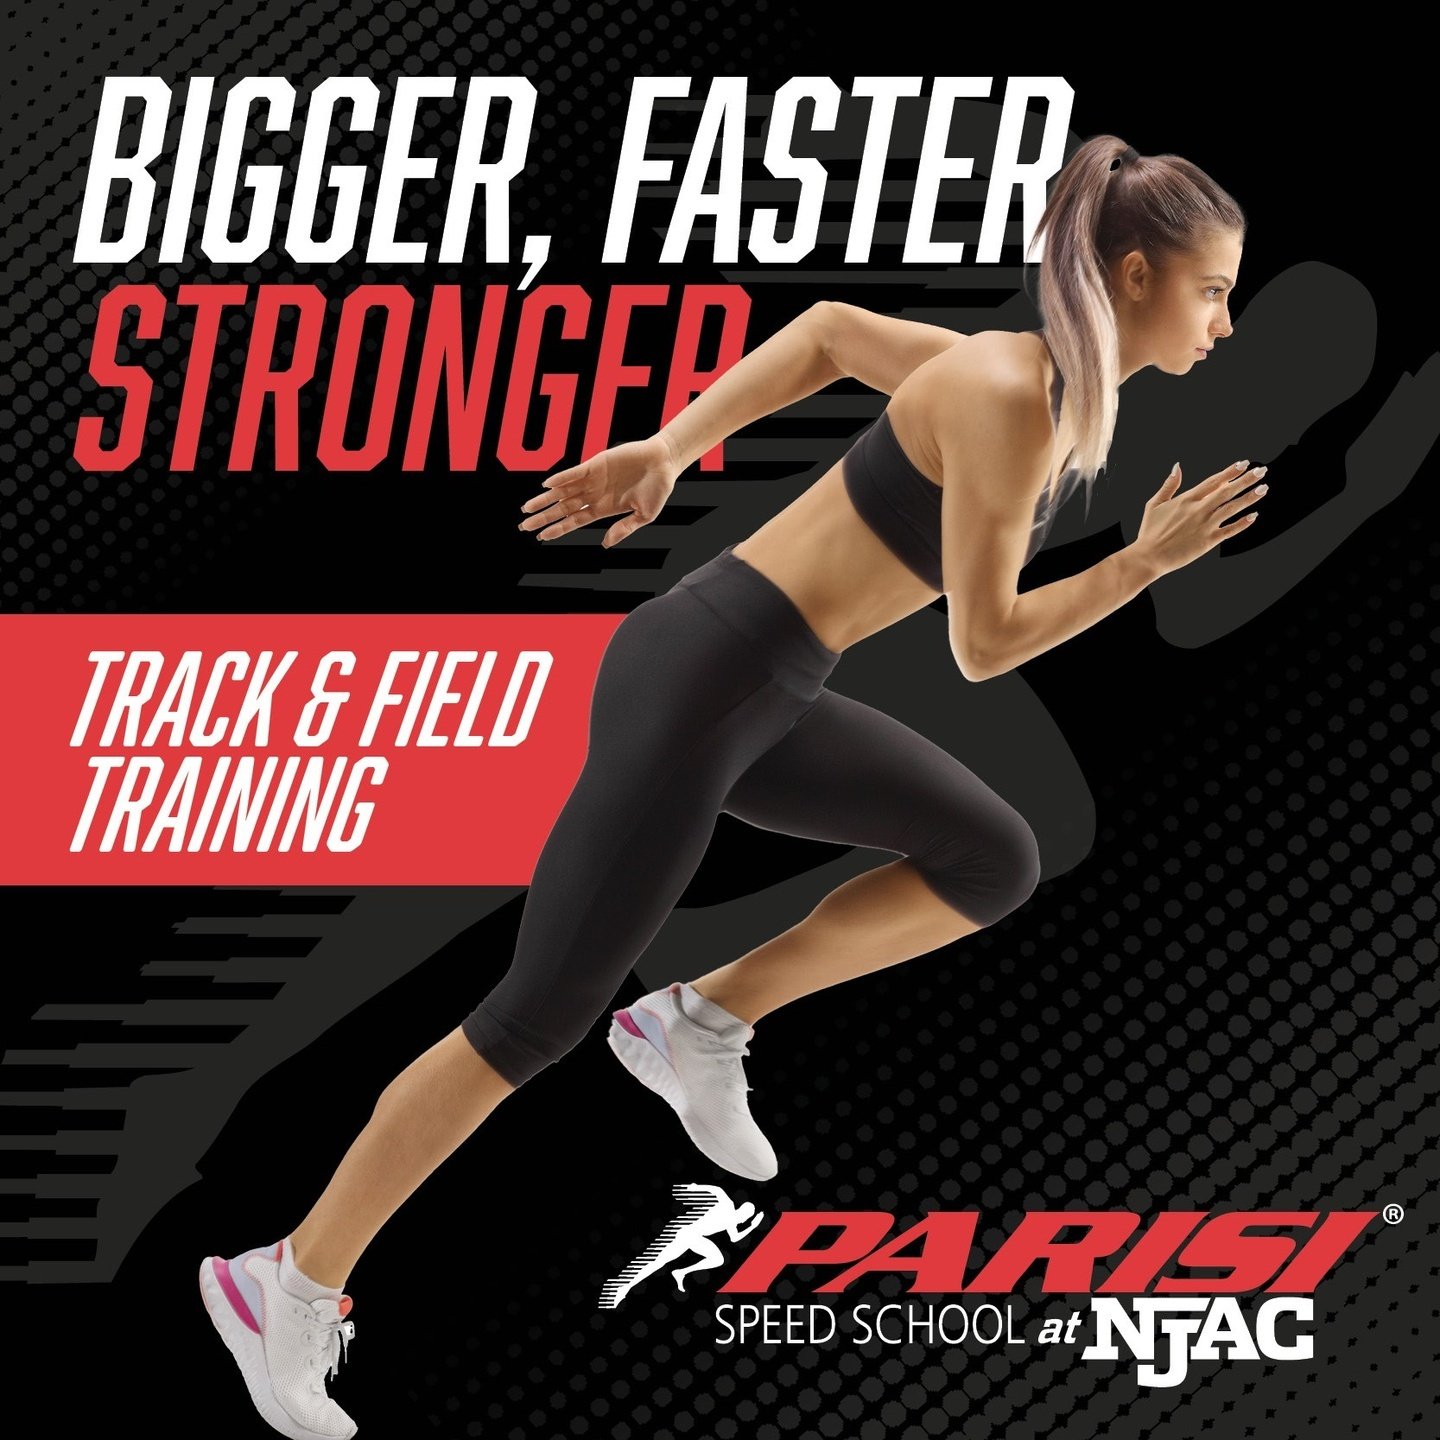 Whether you're on the field, court, or track, our sports-specific training will help you increase speed and agility for peak performance. Visit Parisi Speed School at NJAC: https://www.njac.com/parisi